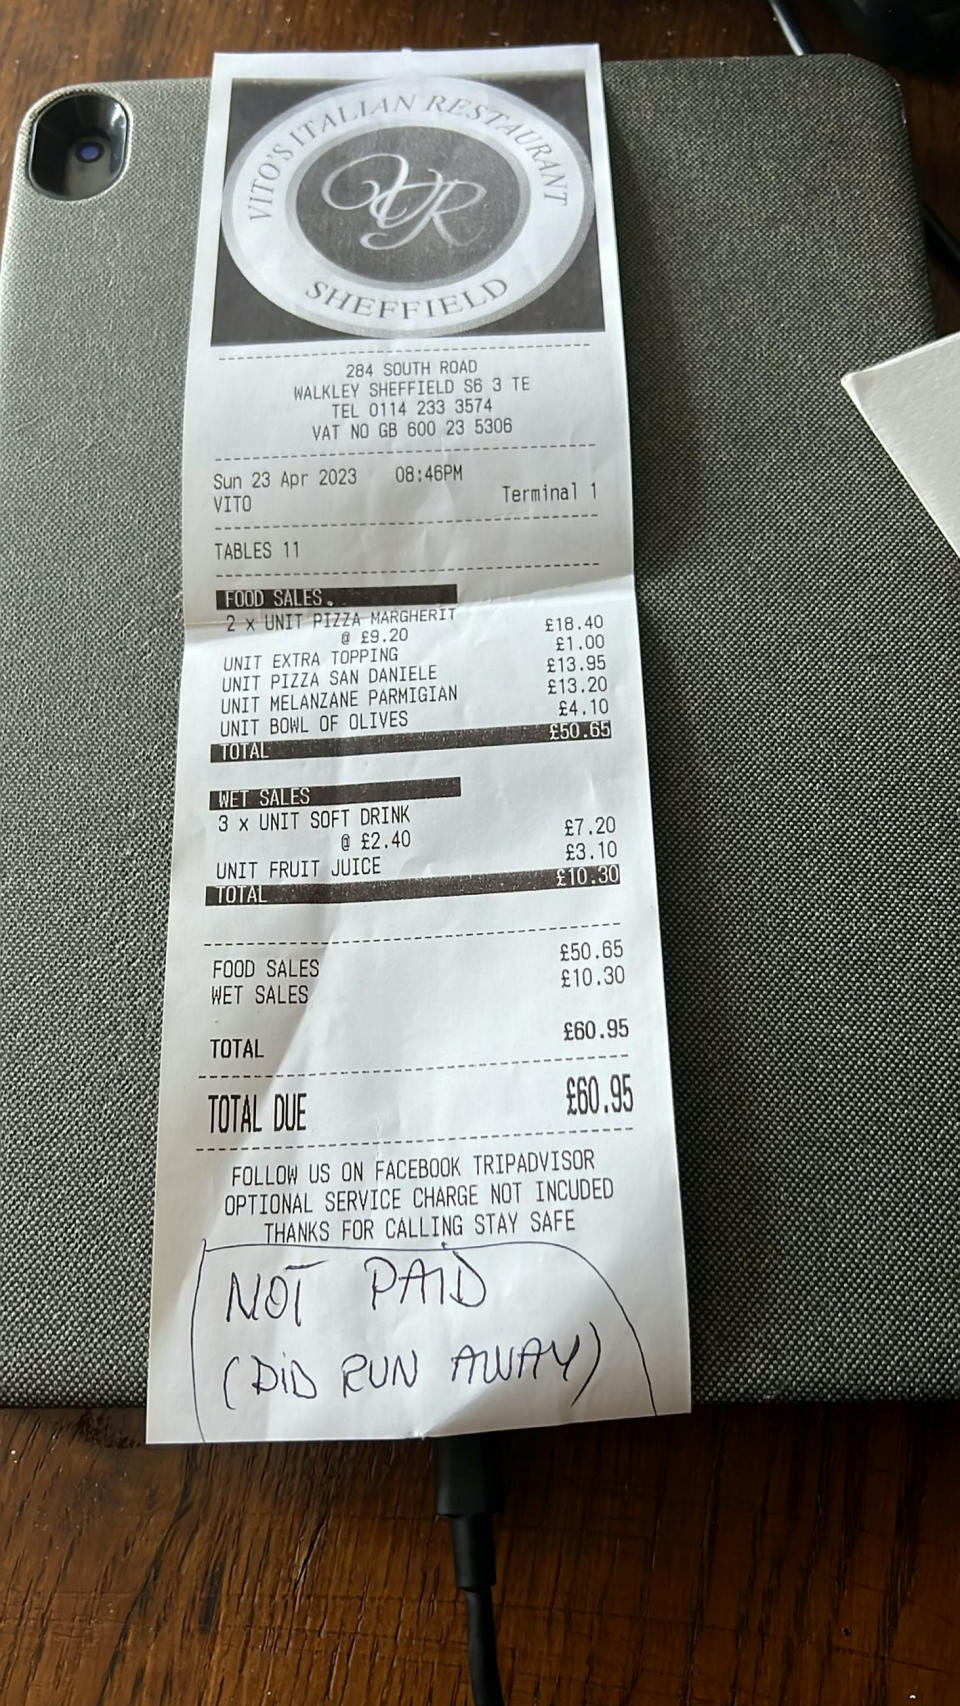 The bill came to £60.95 – which the owner will donate to charity if paid.(SWNS)